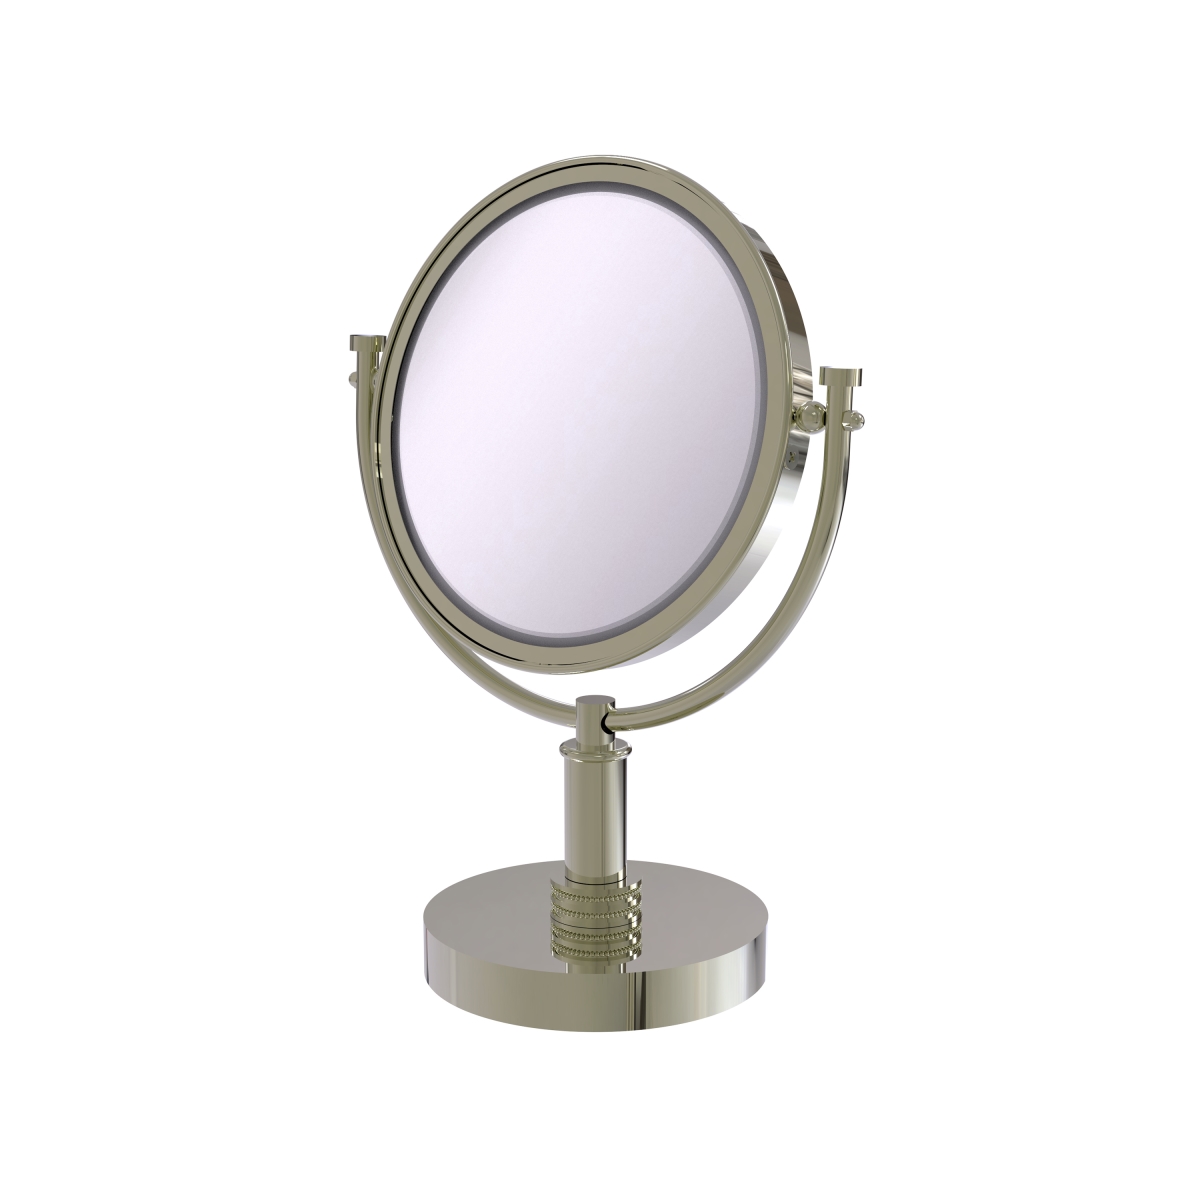 Picture of Allied Brass DM-4D-4X-PNI 8 in. Vanity Top Make-Up Mirror 4X Magnification, Polished Nickel - 15 x 8 x 8 in.